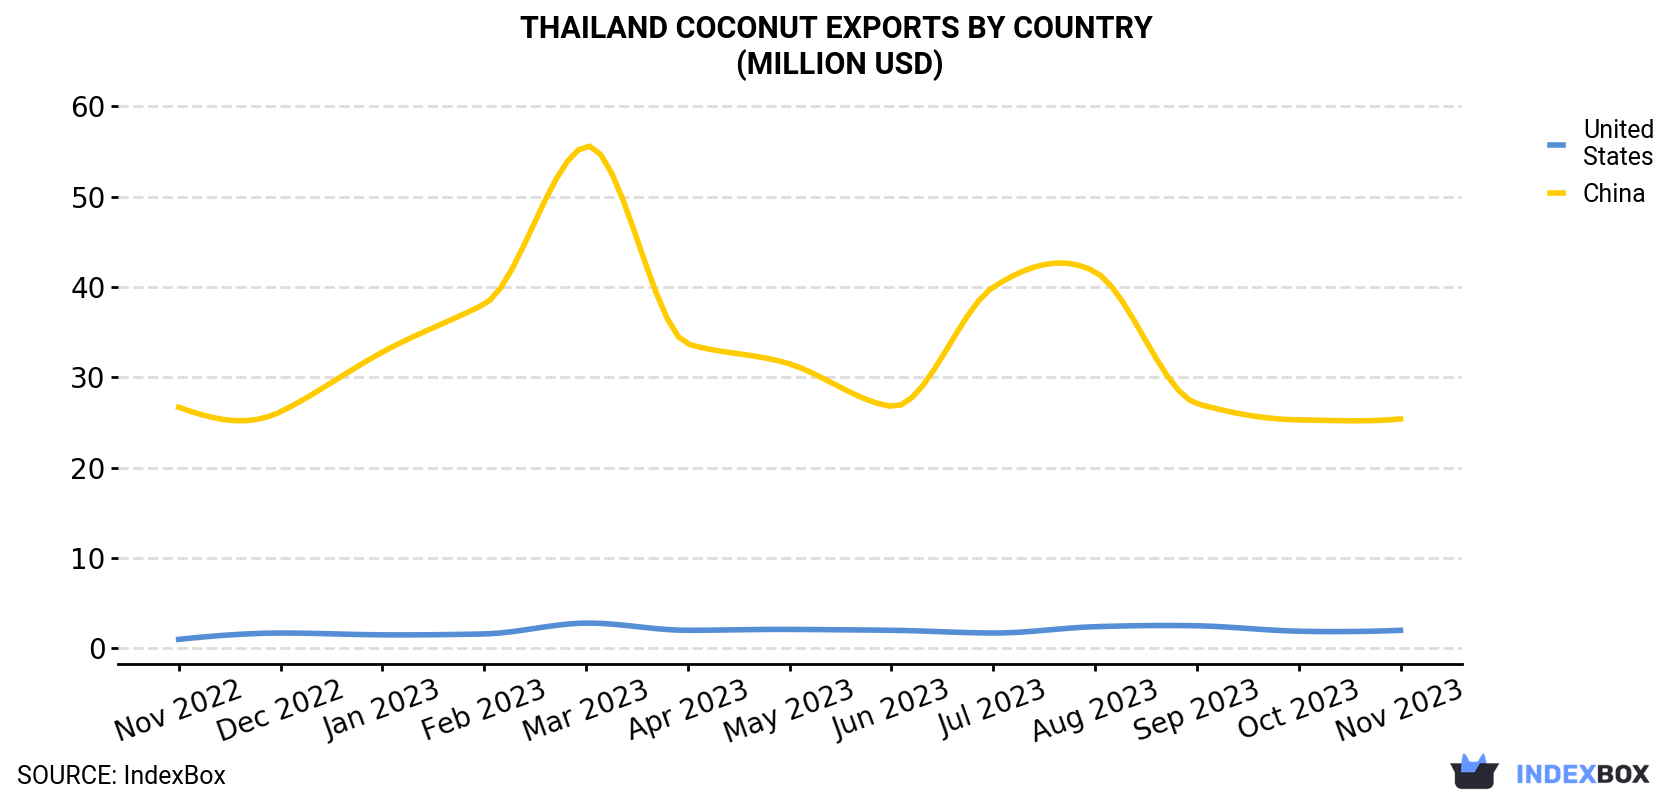 Thailand Coconut Exports By Country (Million USD)